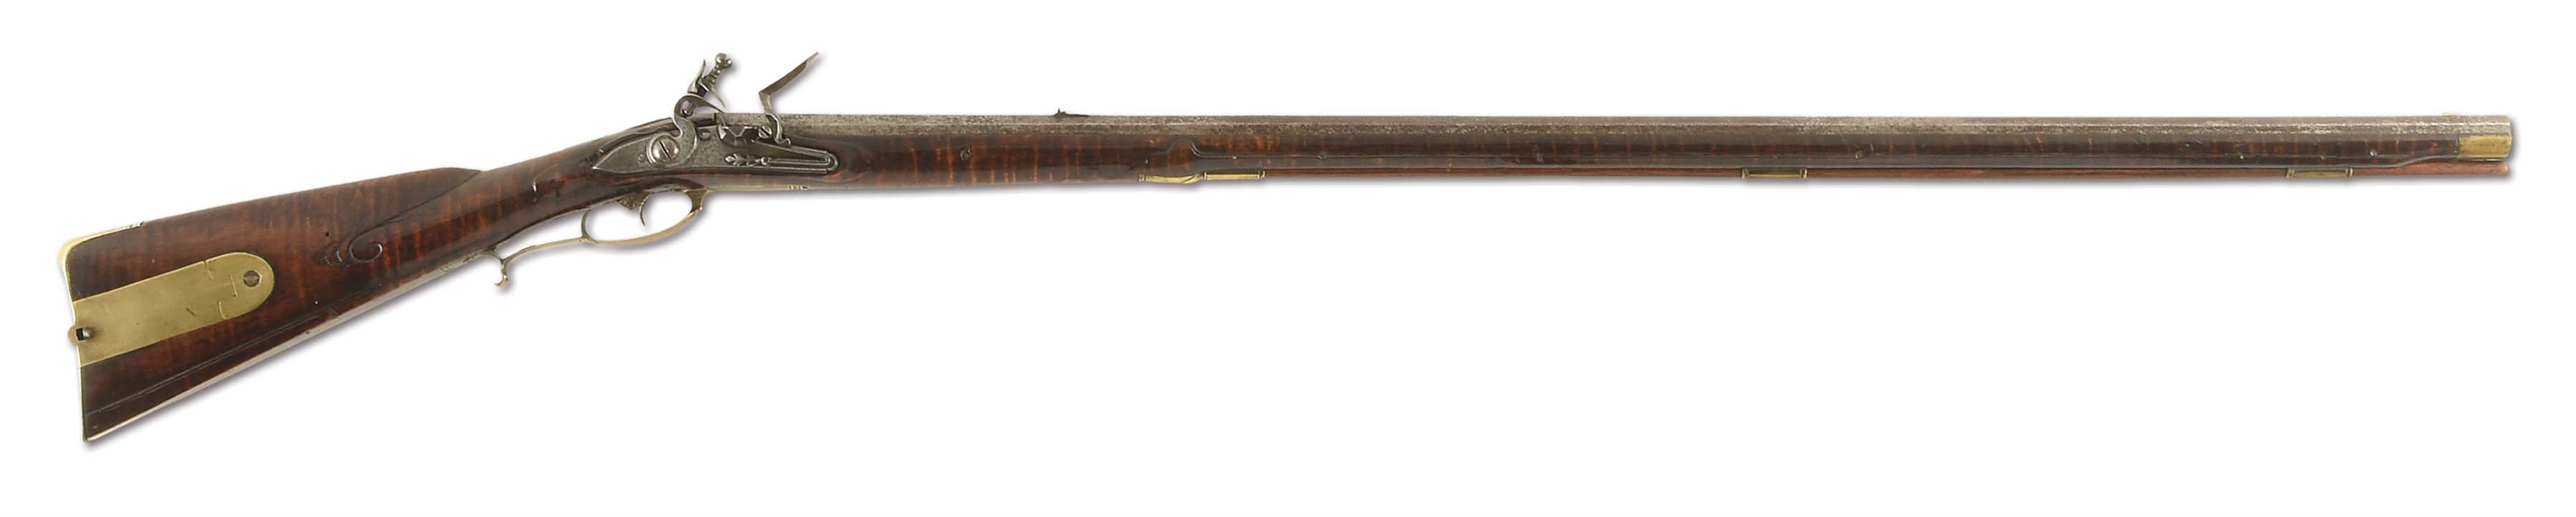 (A) EARLY AND FINE MORAVIAN FLINTLOCK RIFLE ATTRIBUTED TO ANDREAS ALBRECHT.